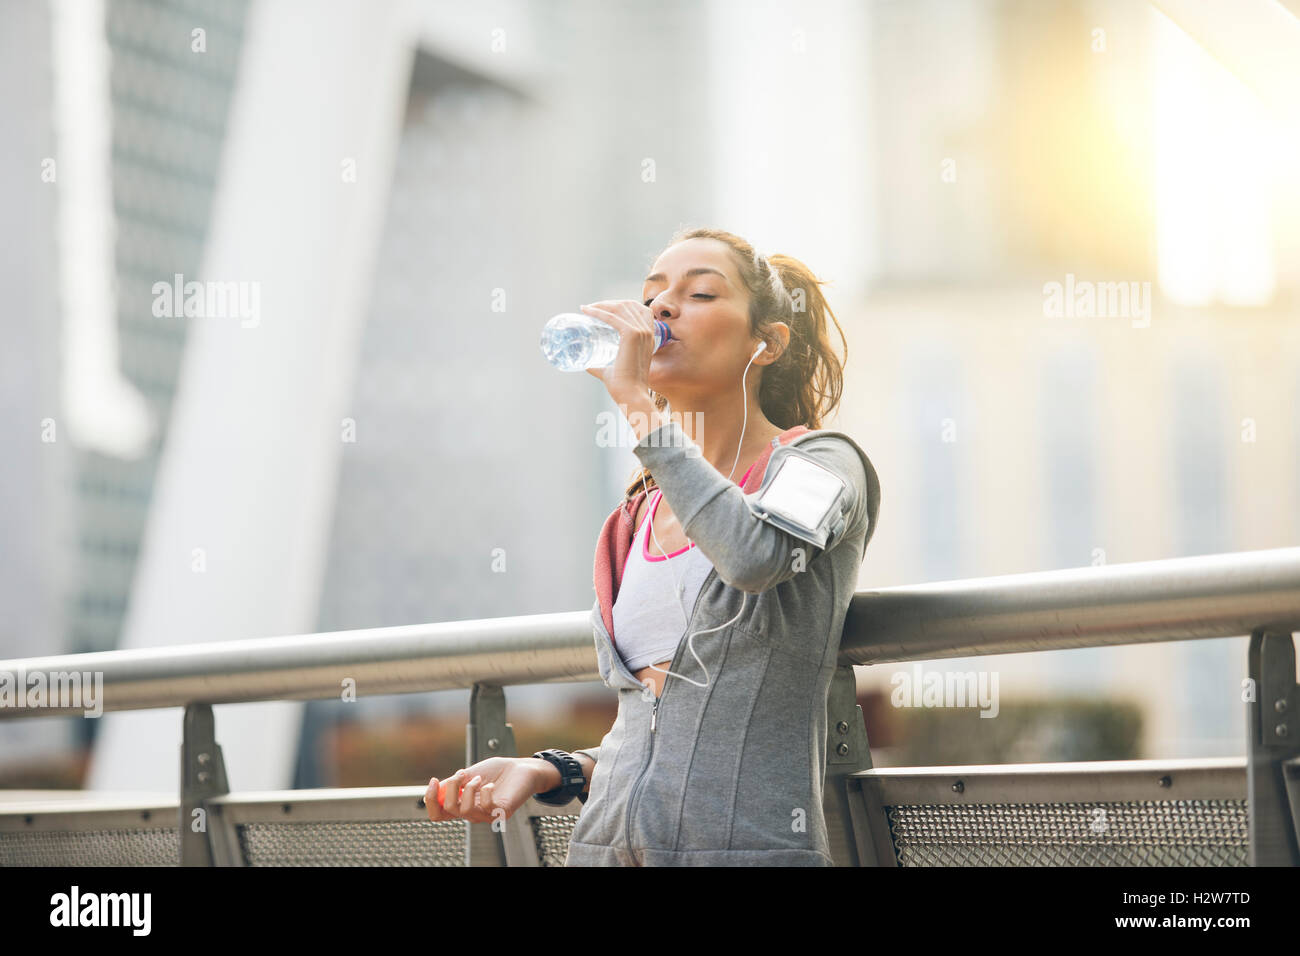 Woman runner is having a break and drinking water Stock Photo